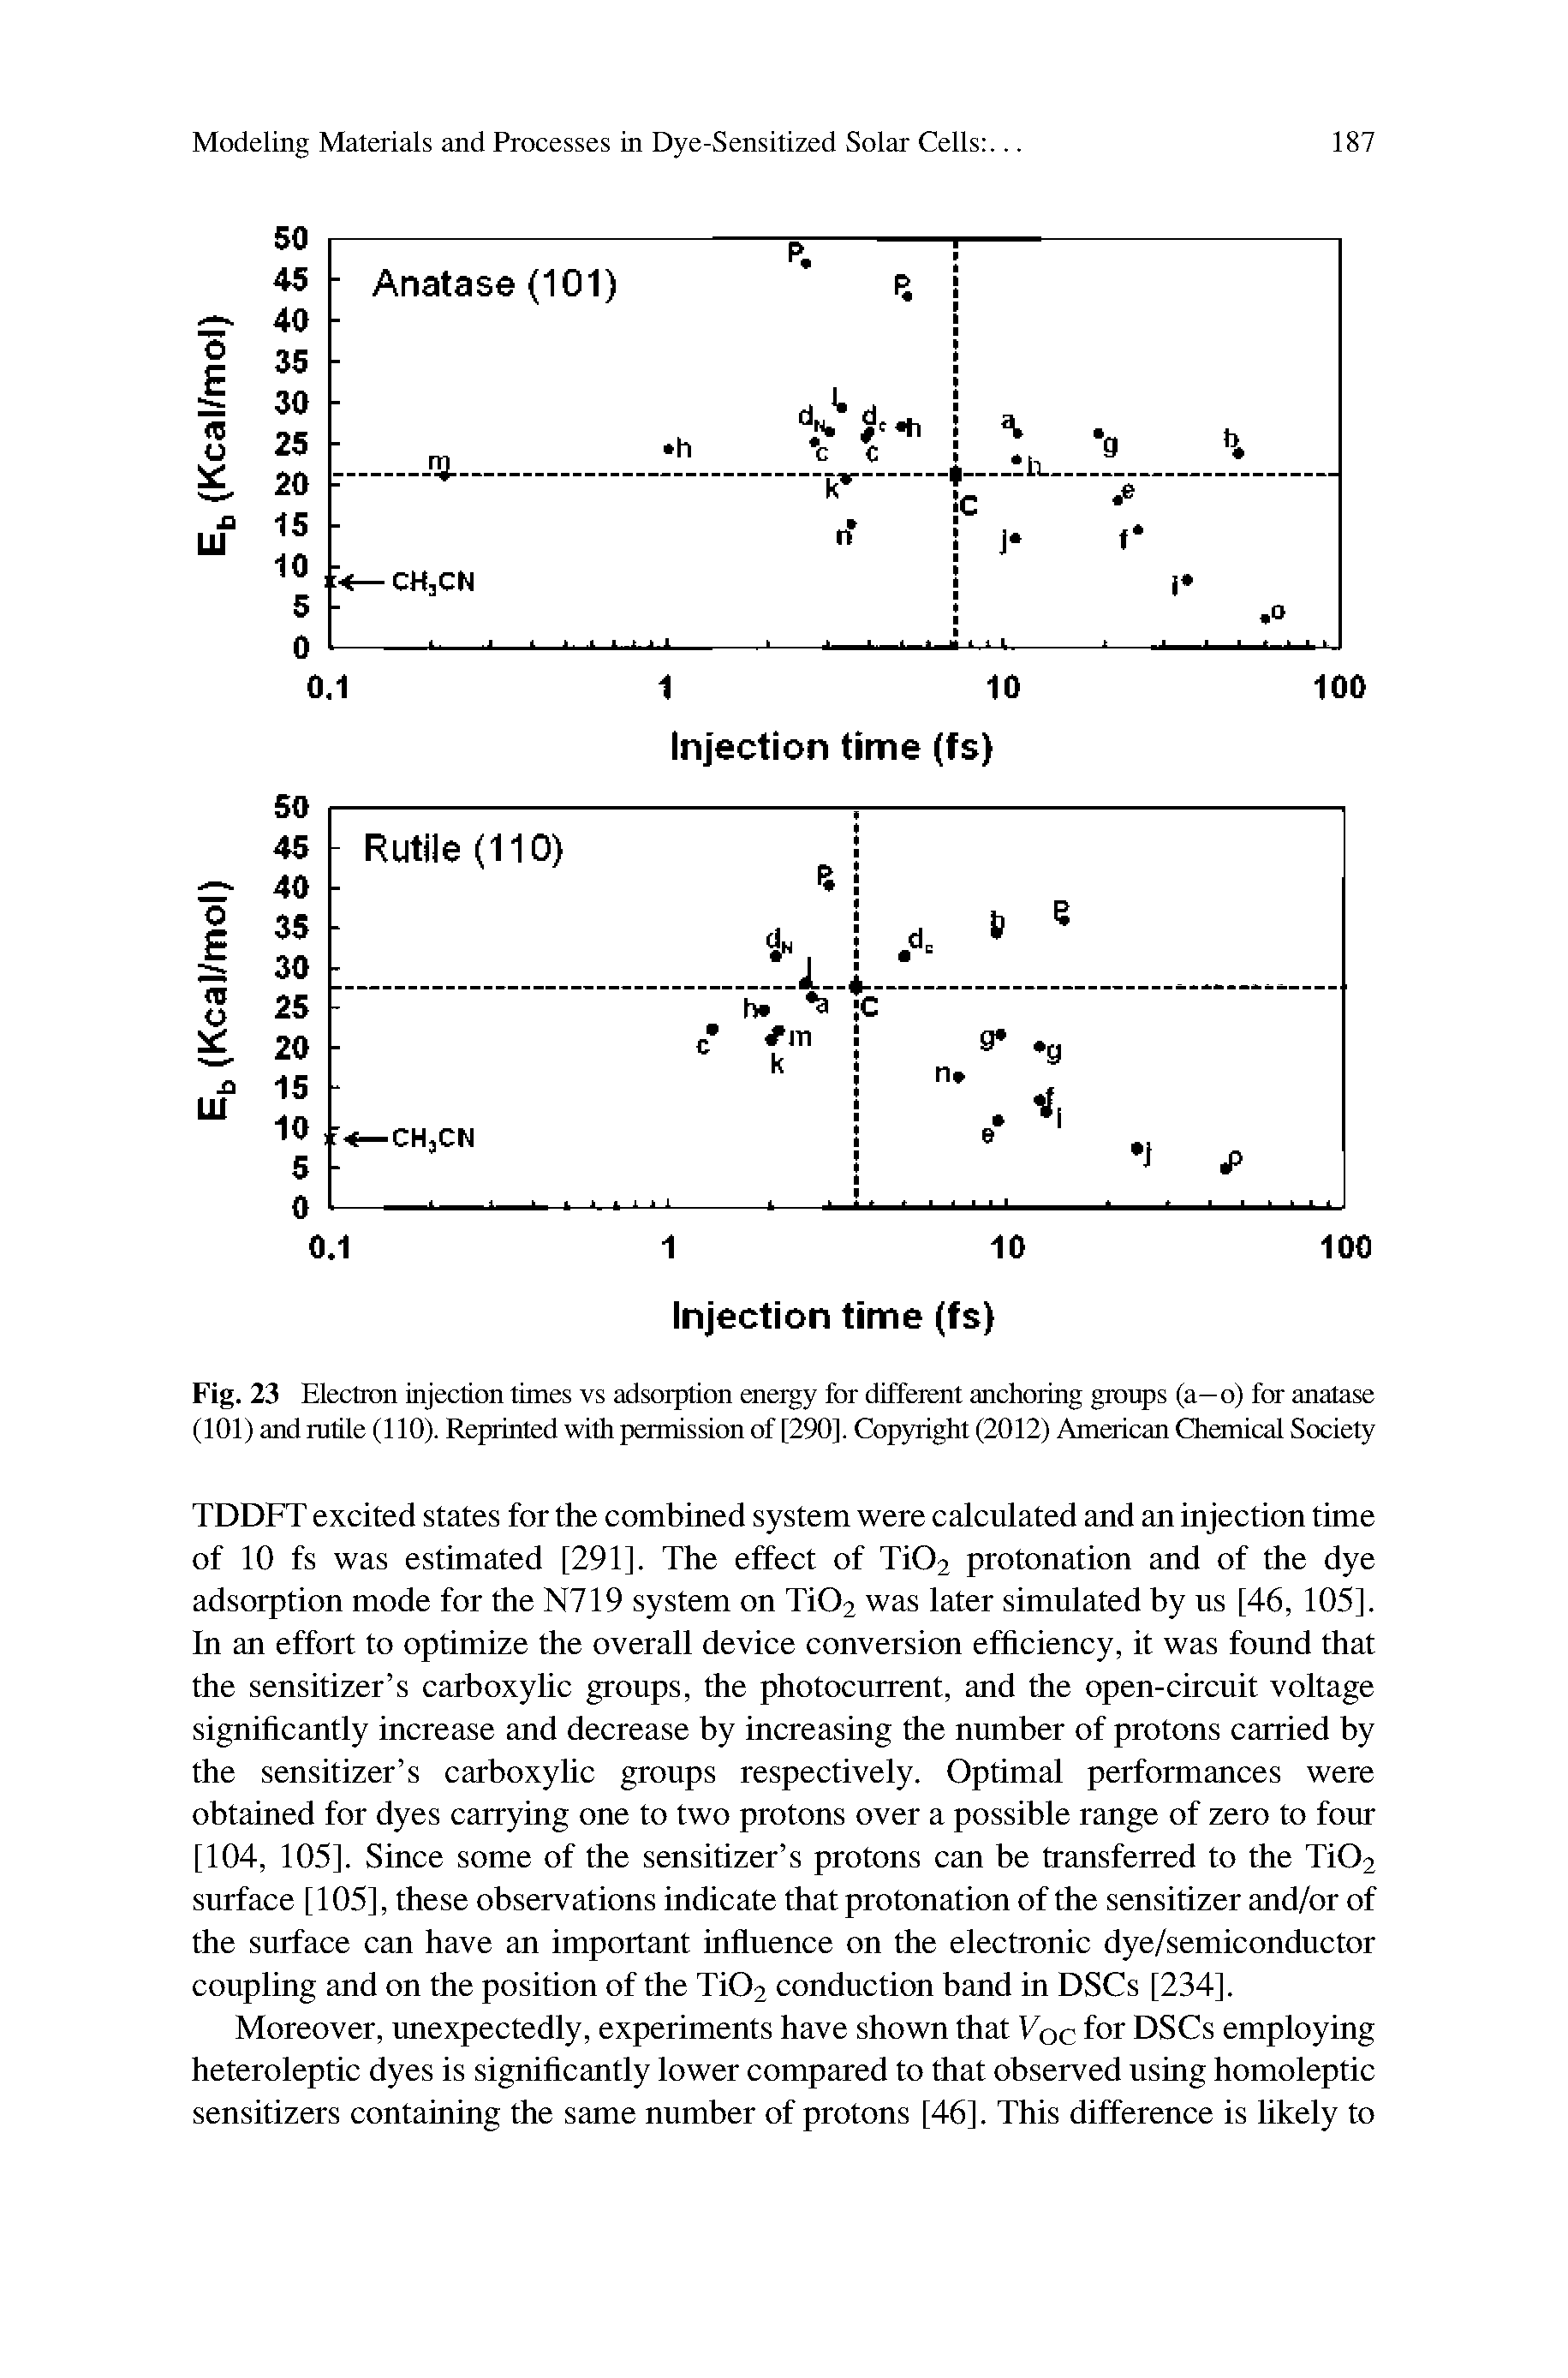 Fig. 23 Electron injection times vs adsorption energy for different anchoring groups (a—o) for anatase (101) and rutile (110). Reprinted with permission of [290]. Copyright (2012) American Chemical Society...